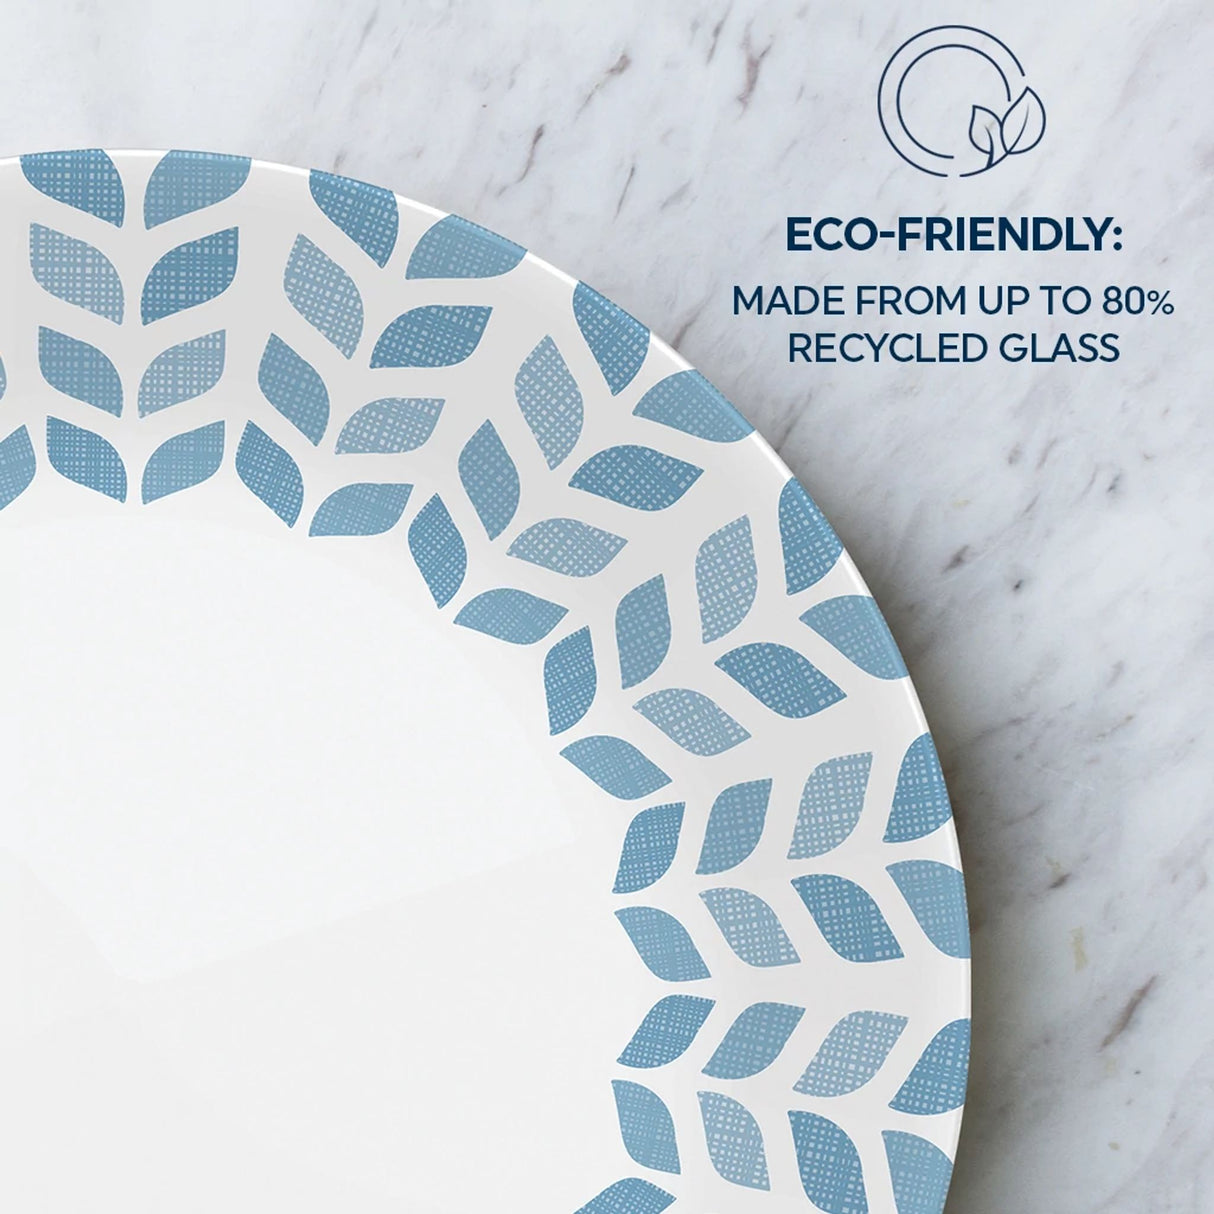  Global Collection Northern Pines 10.25" Dinner Plate with text eco-friendly made from up to 80% recycled glass